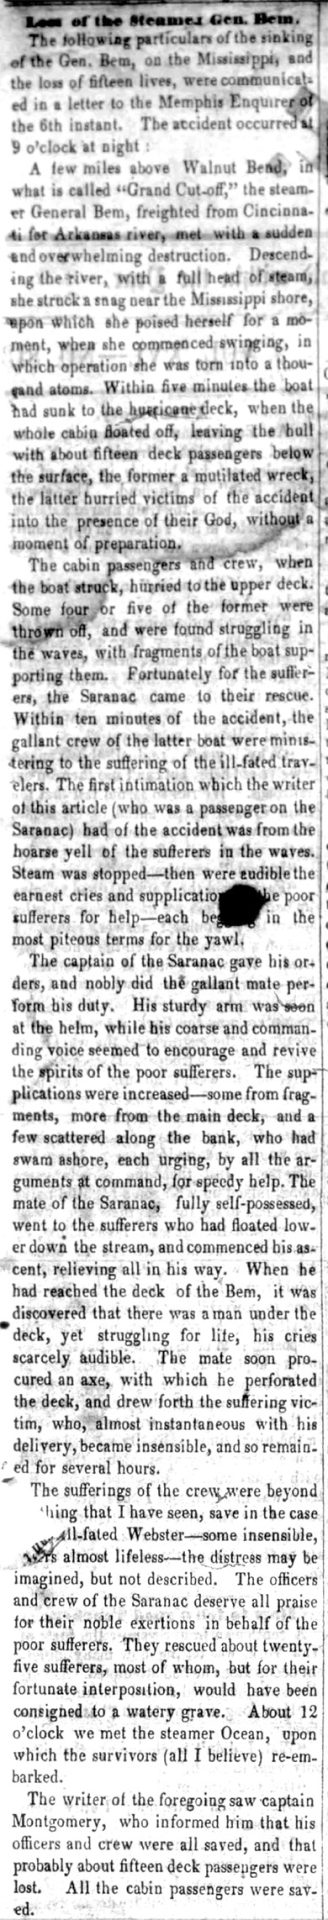 "Loss of the steamer General Bem" newspaper clipping